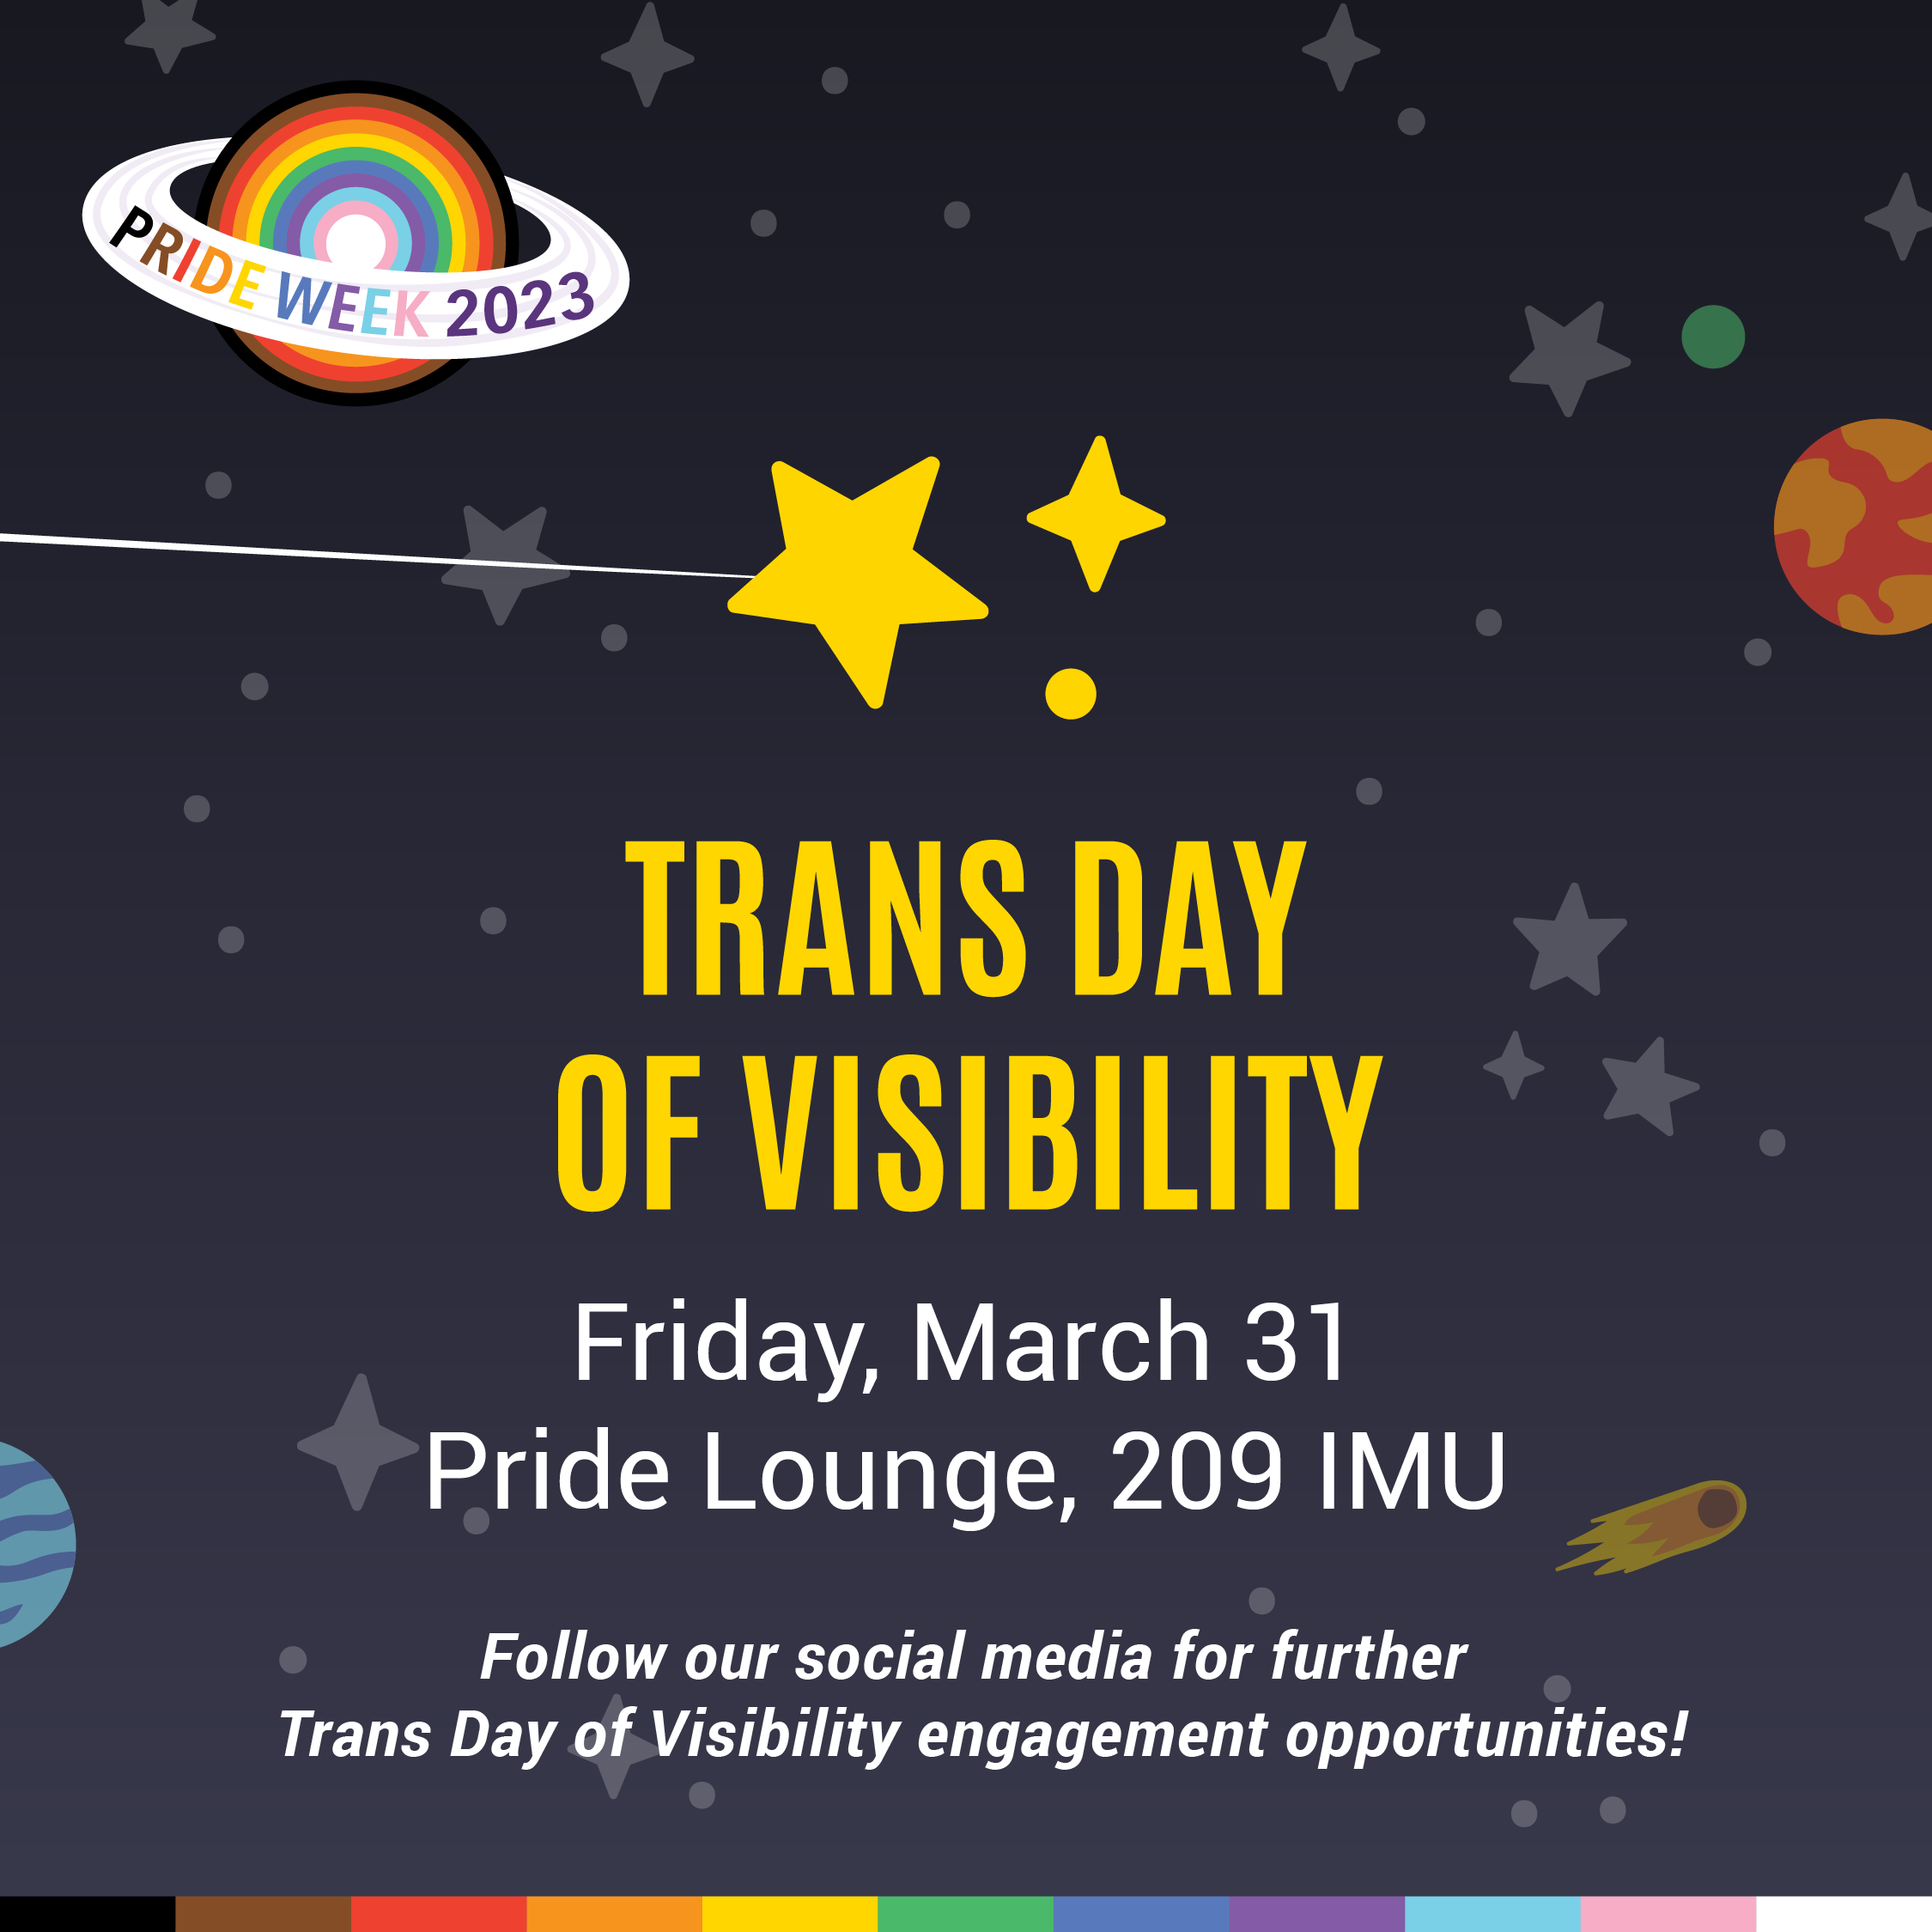 Starry background with the Pride Week logo in the top left corner of the image. Event details are written in yellow and white text, with an inclusive rainbow banner on the bottom.